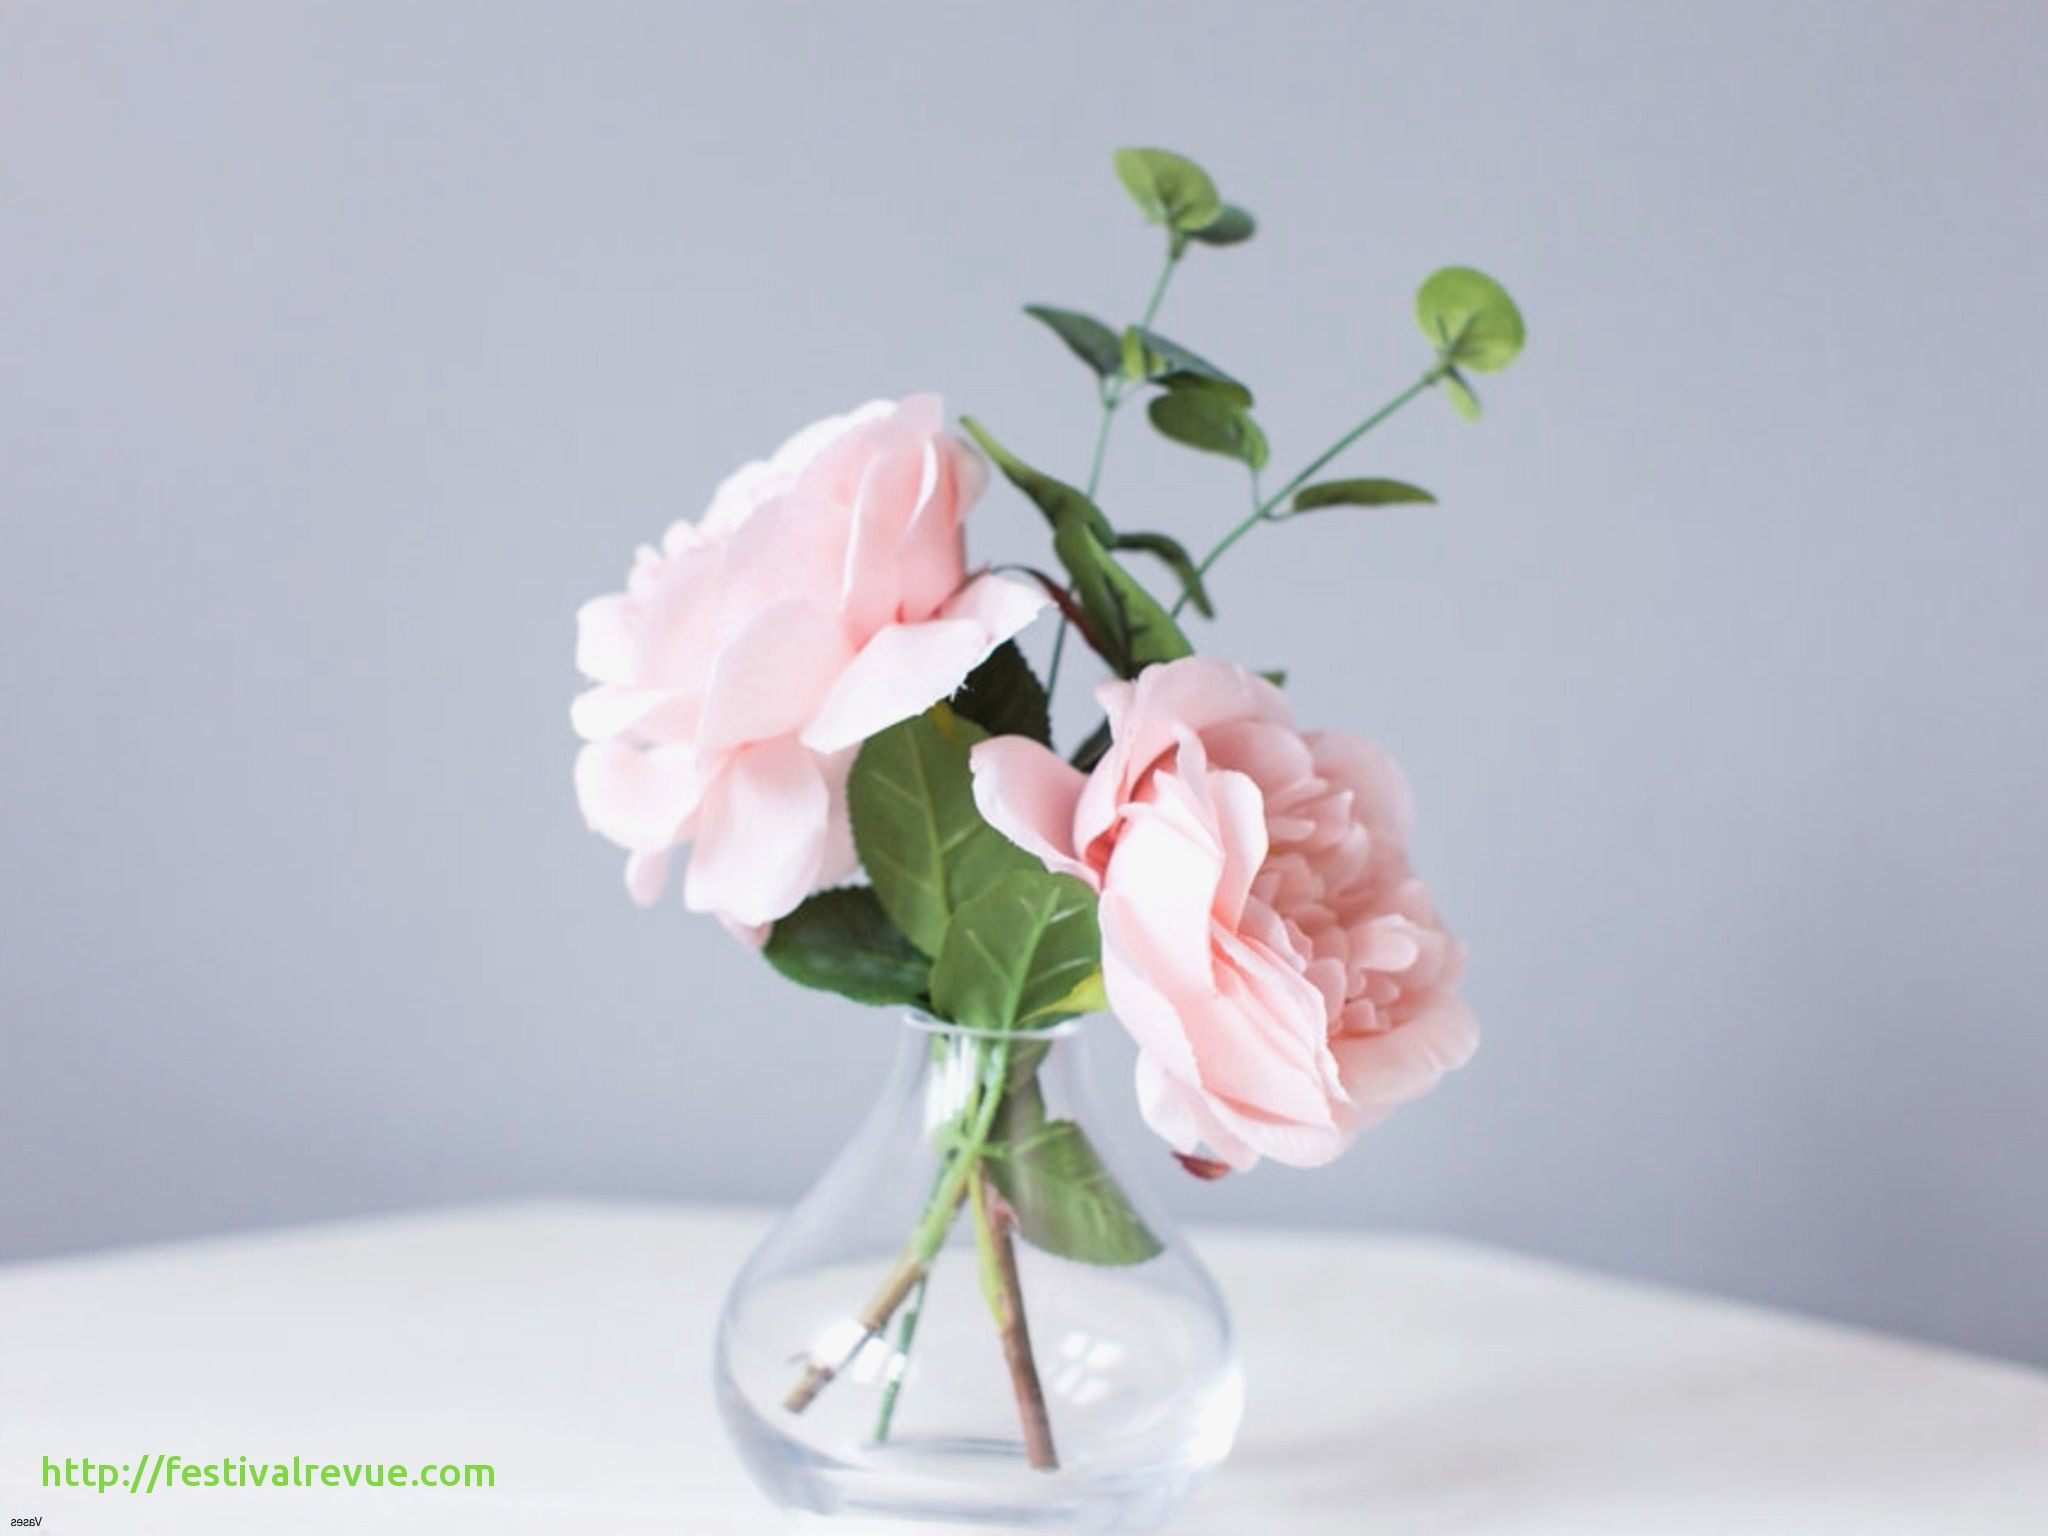 21 Fabulous 6 Bud Vase 2024 free download 6 bud vase of awesome white wallpaper with flowers and 6 pictures festivalrevue com within rose bud flower white wallpaper for 5s fresh h vases bud vase flower arrangements i 0d